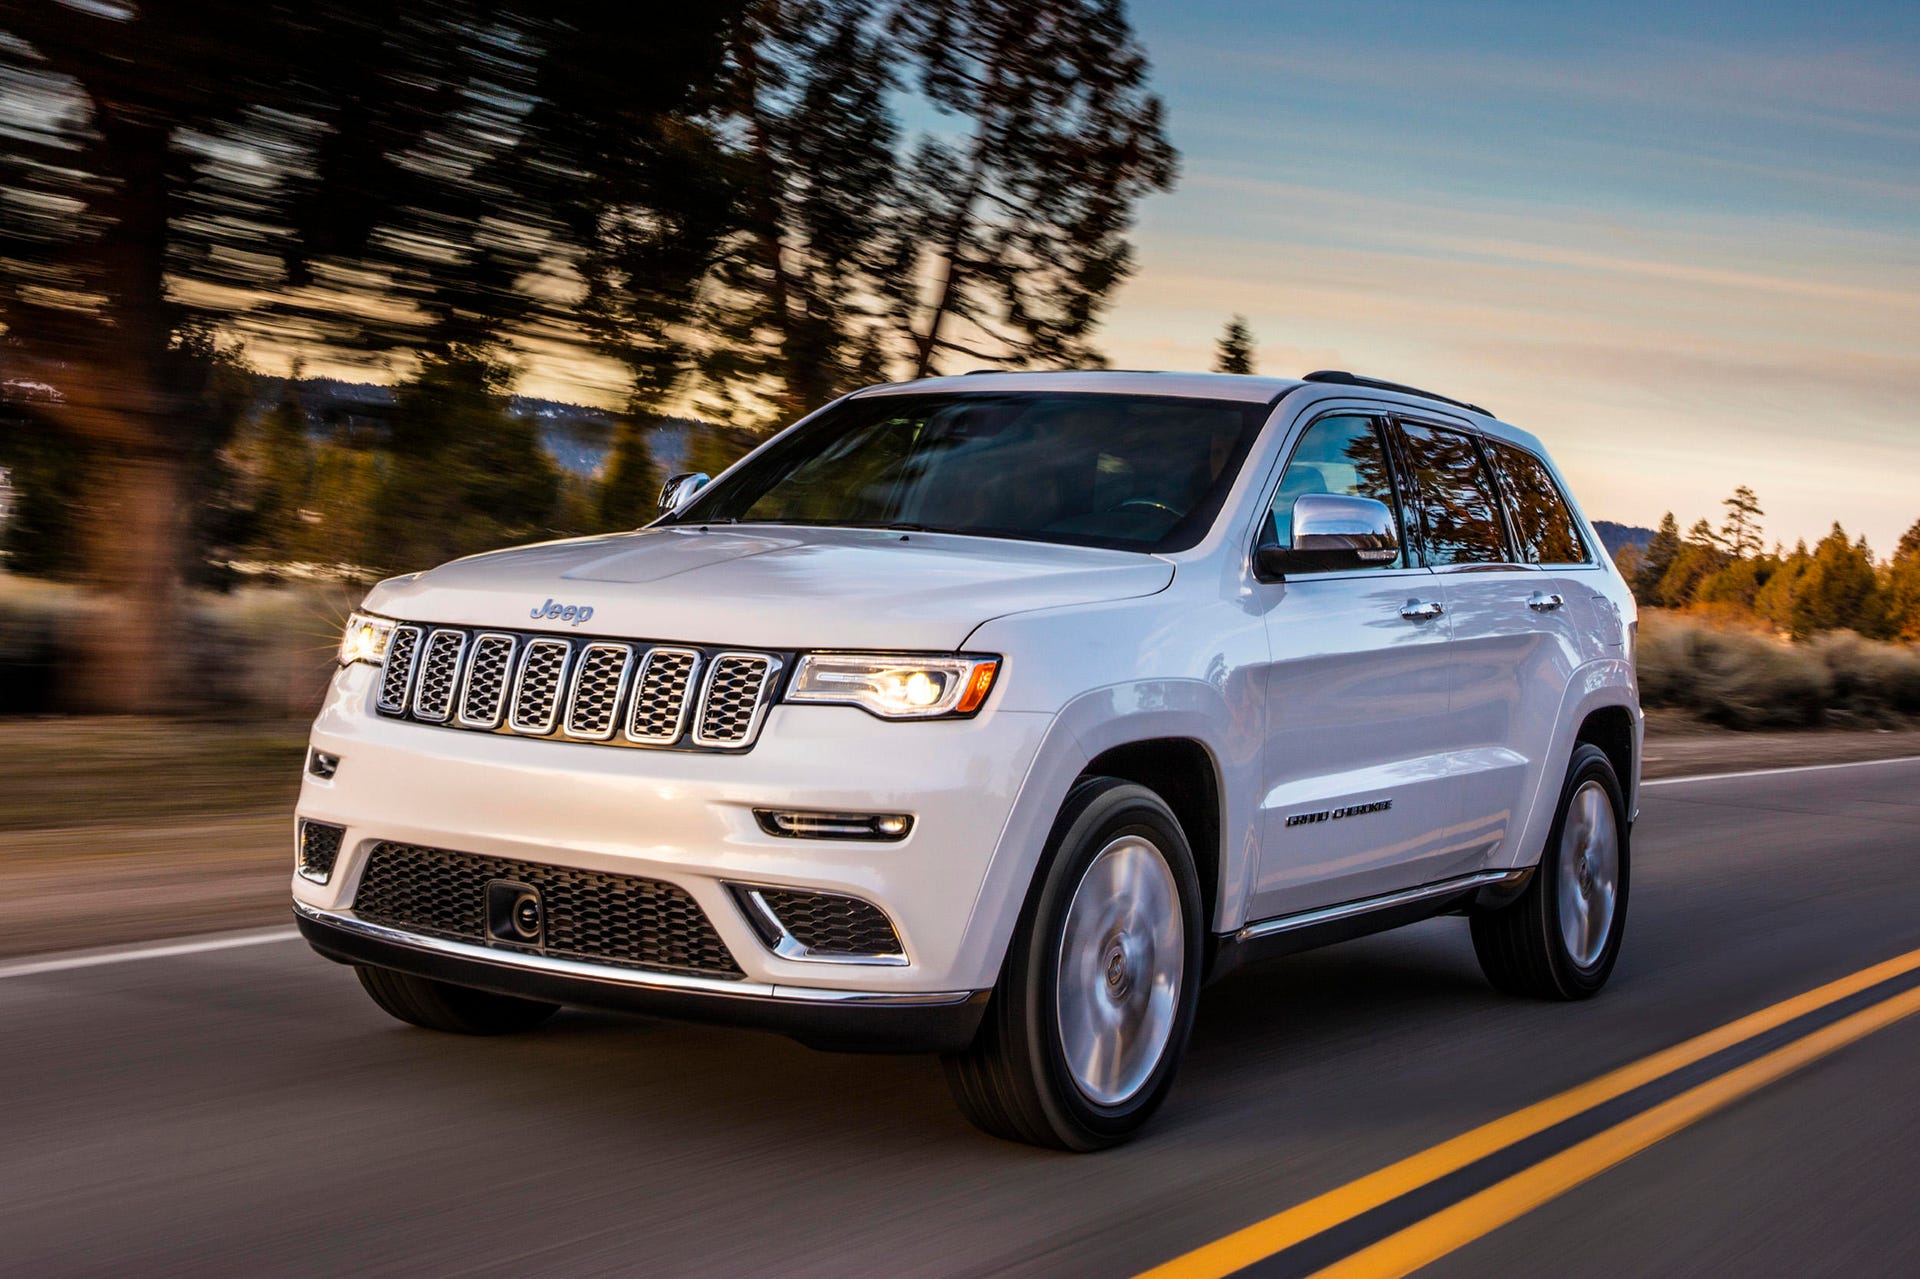 2020 Jeep Grand Cherokee: Model overview, pricing, tech and specs - CNET